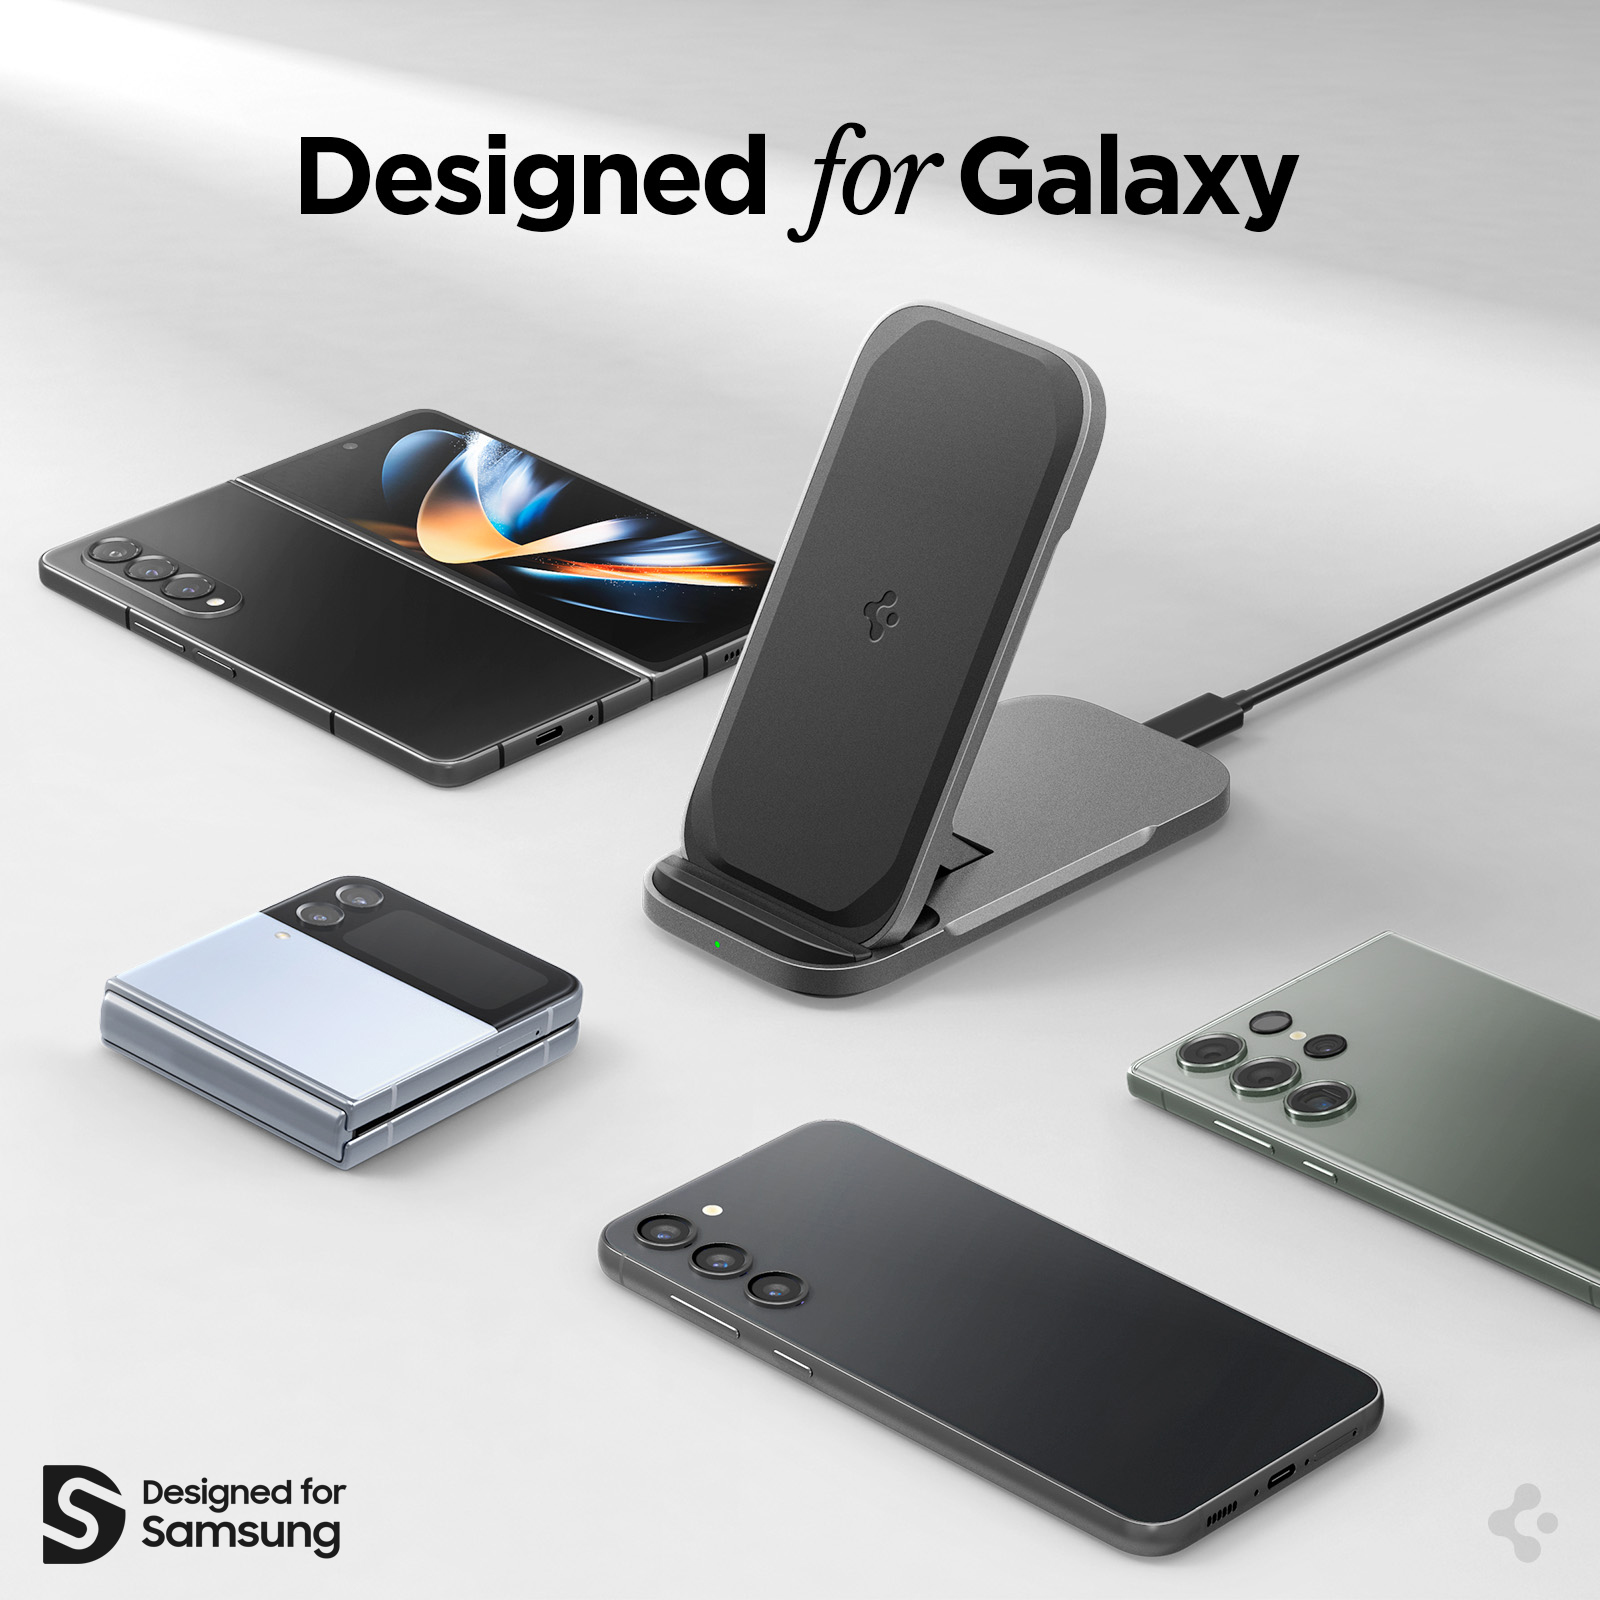 The New Spigen 'Designed for Samsung' Certified Wireless Charger